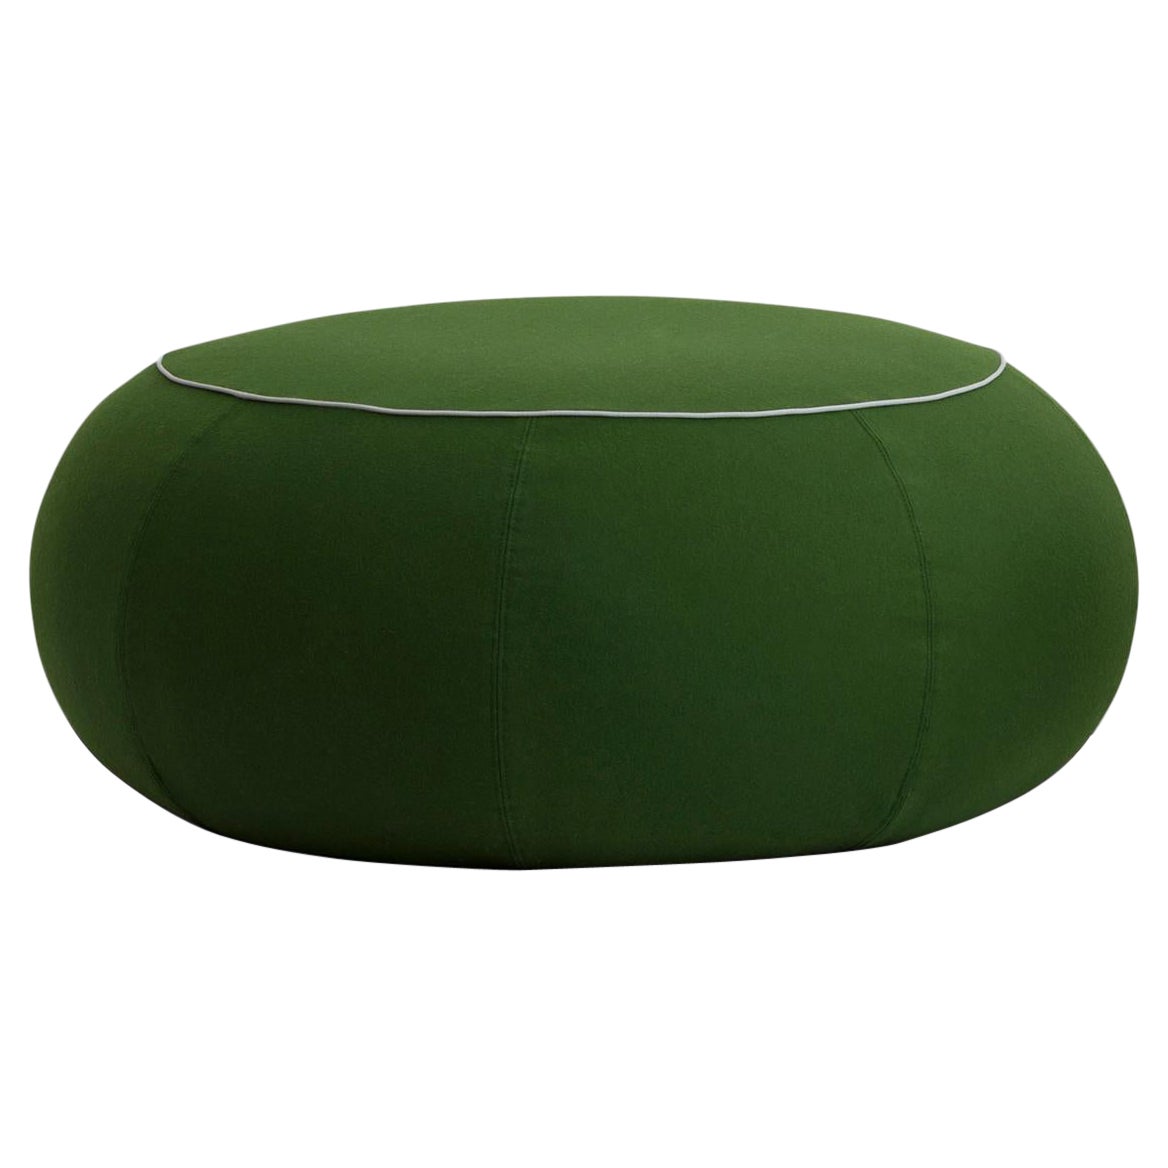 Geo Large Pouf in Lario Top Green Upholstery by Paolo Grasselli For Sale